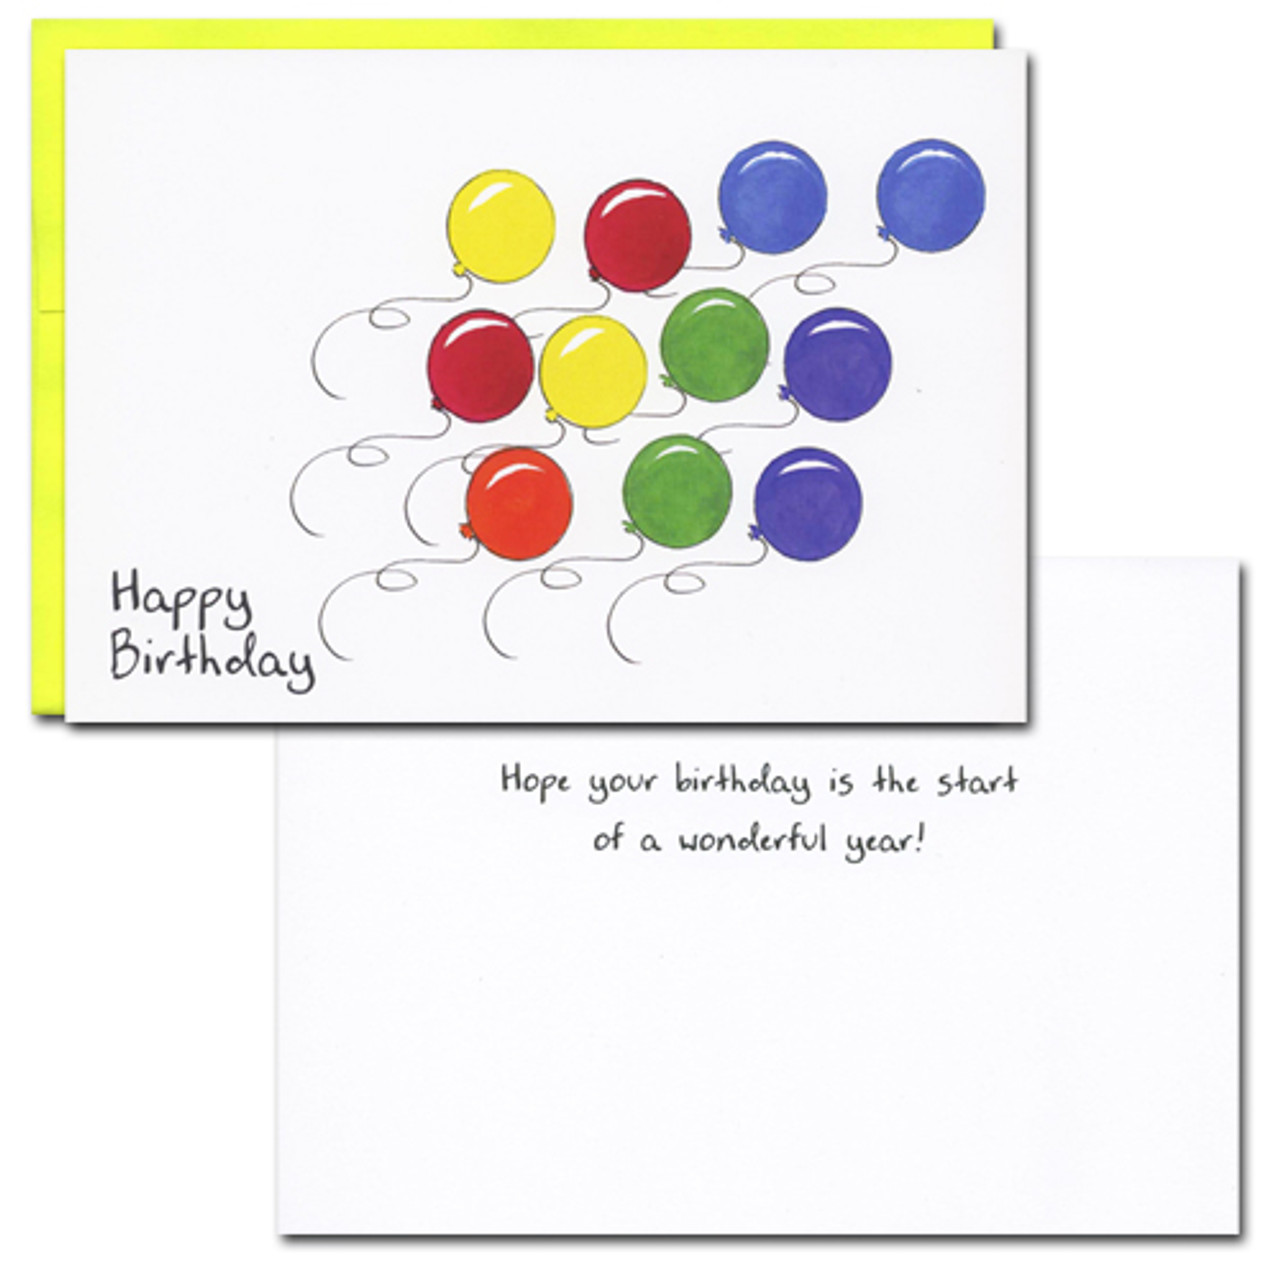 Balloon Race Birthday Card with text “Happy Birthday”
Inside reads: Hope your Birthday is the start of a wonderful year
